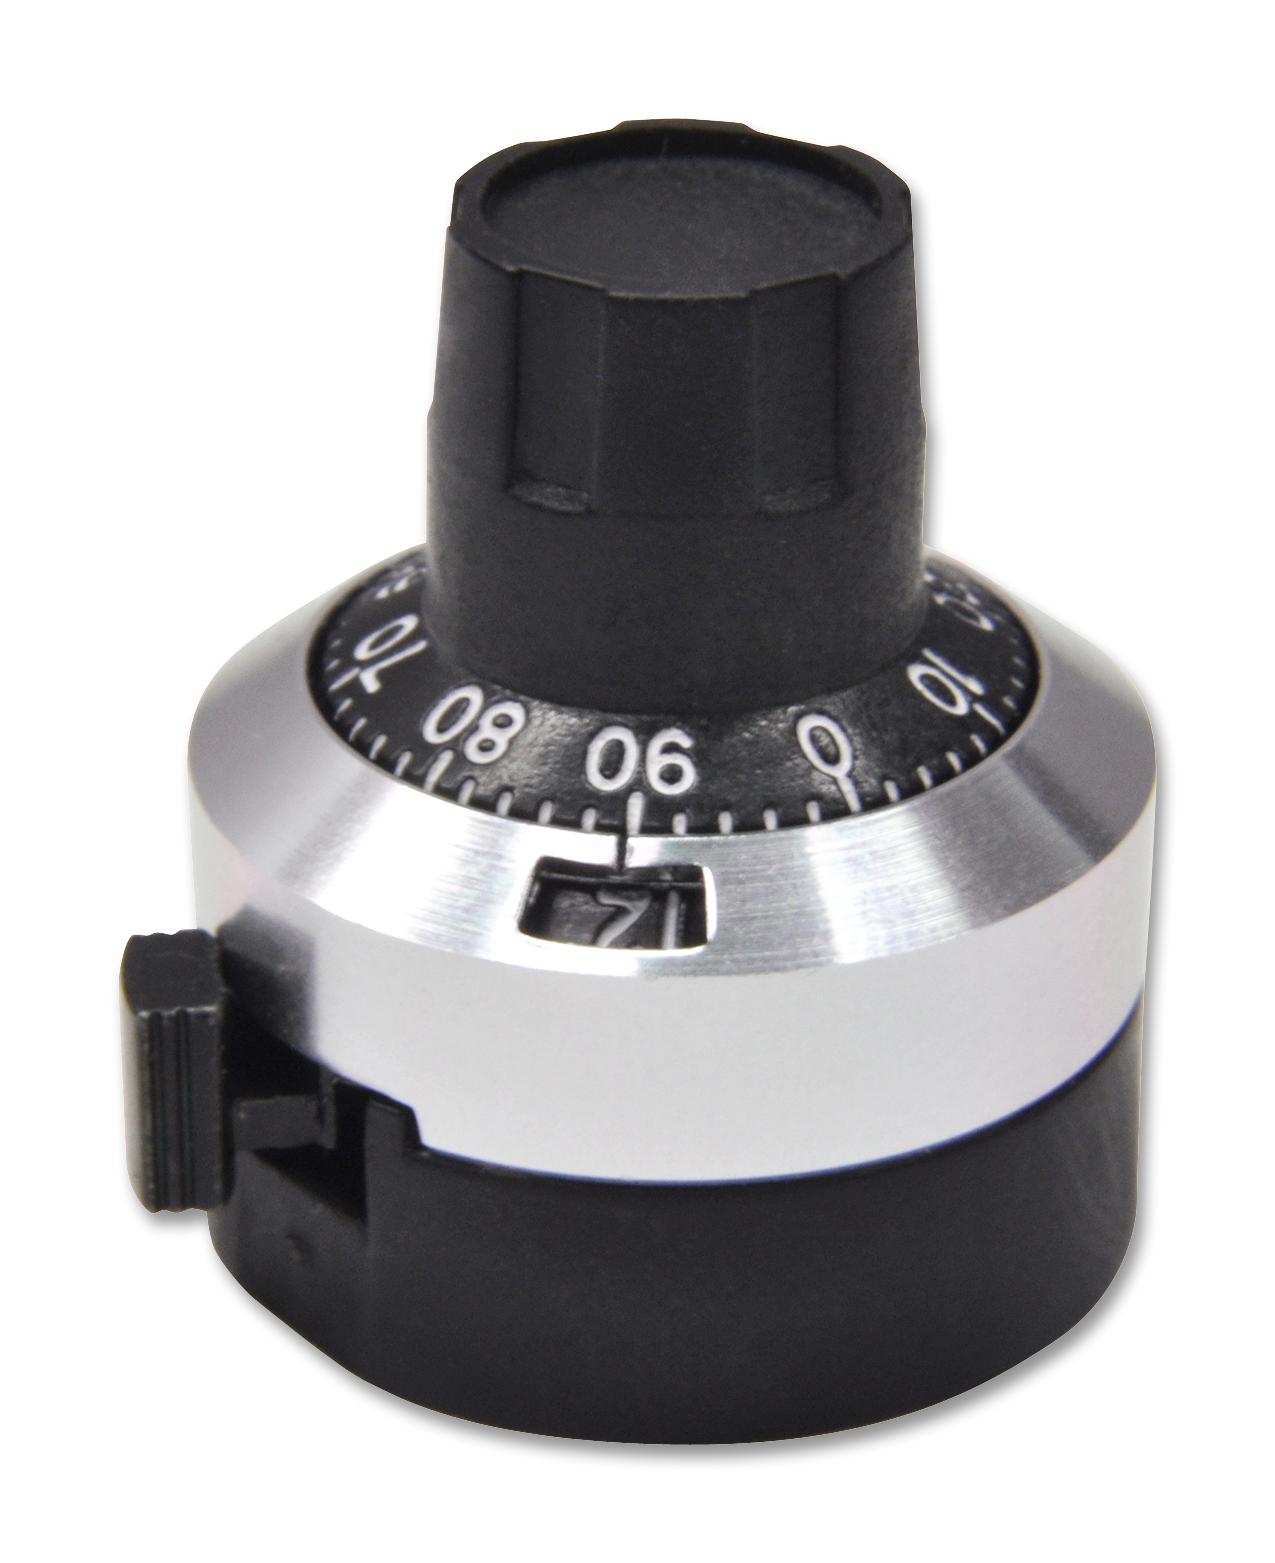 H-516-6M COUNTING DIAL, 15 TURN, 6MM BOURNS